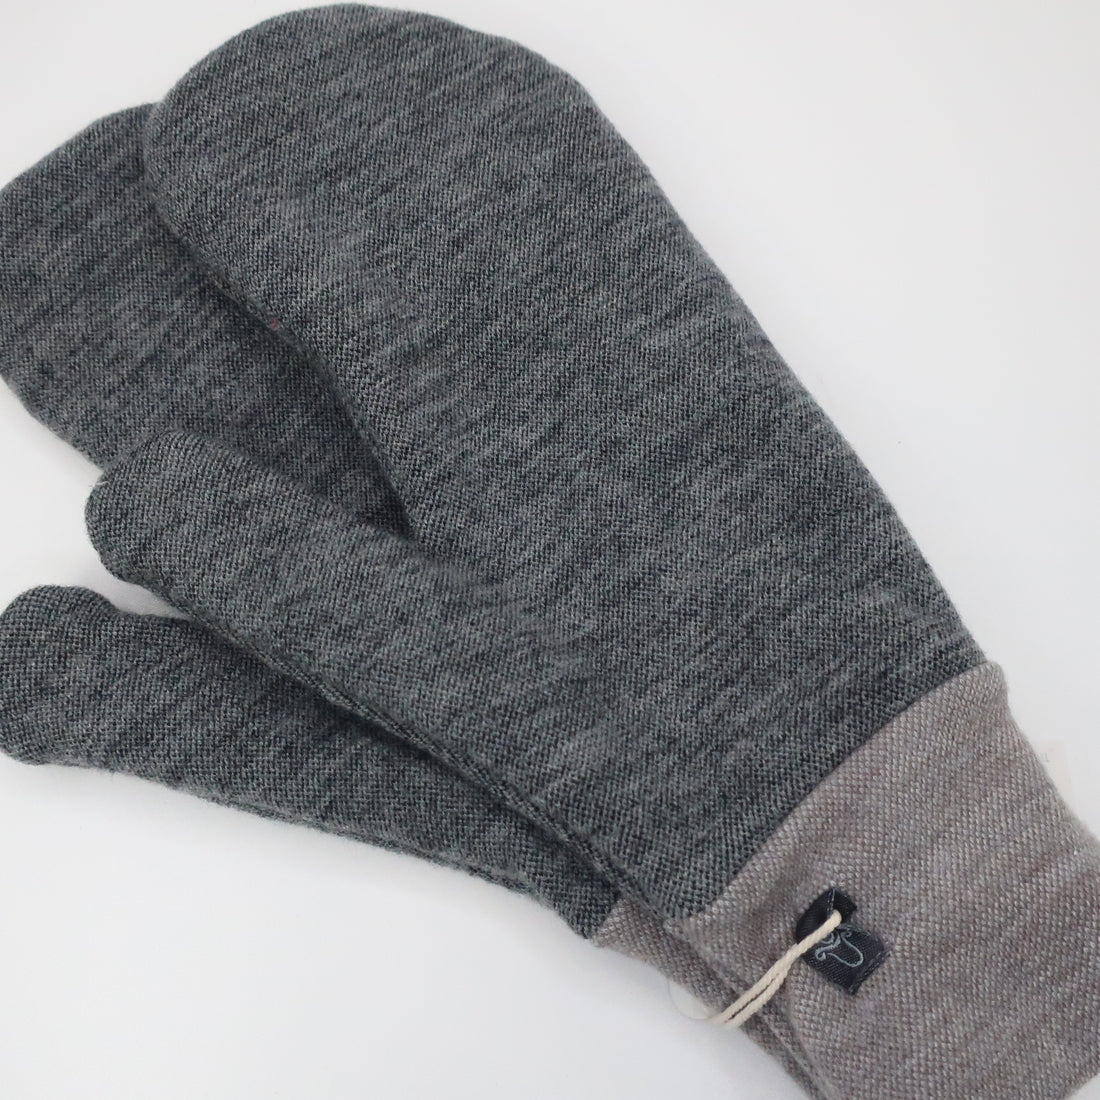 Bumby Wool Mitts - Adult